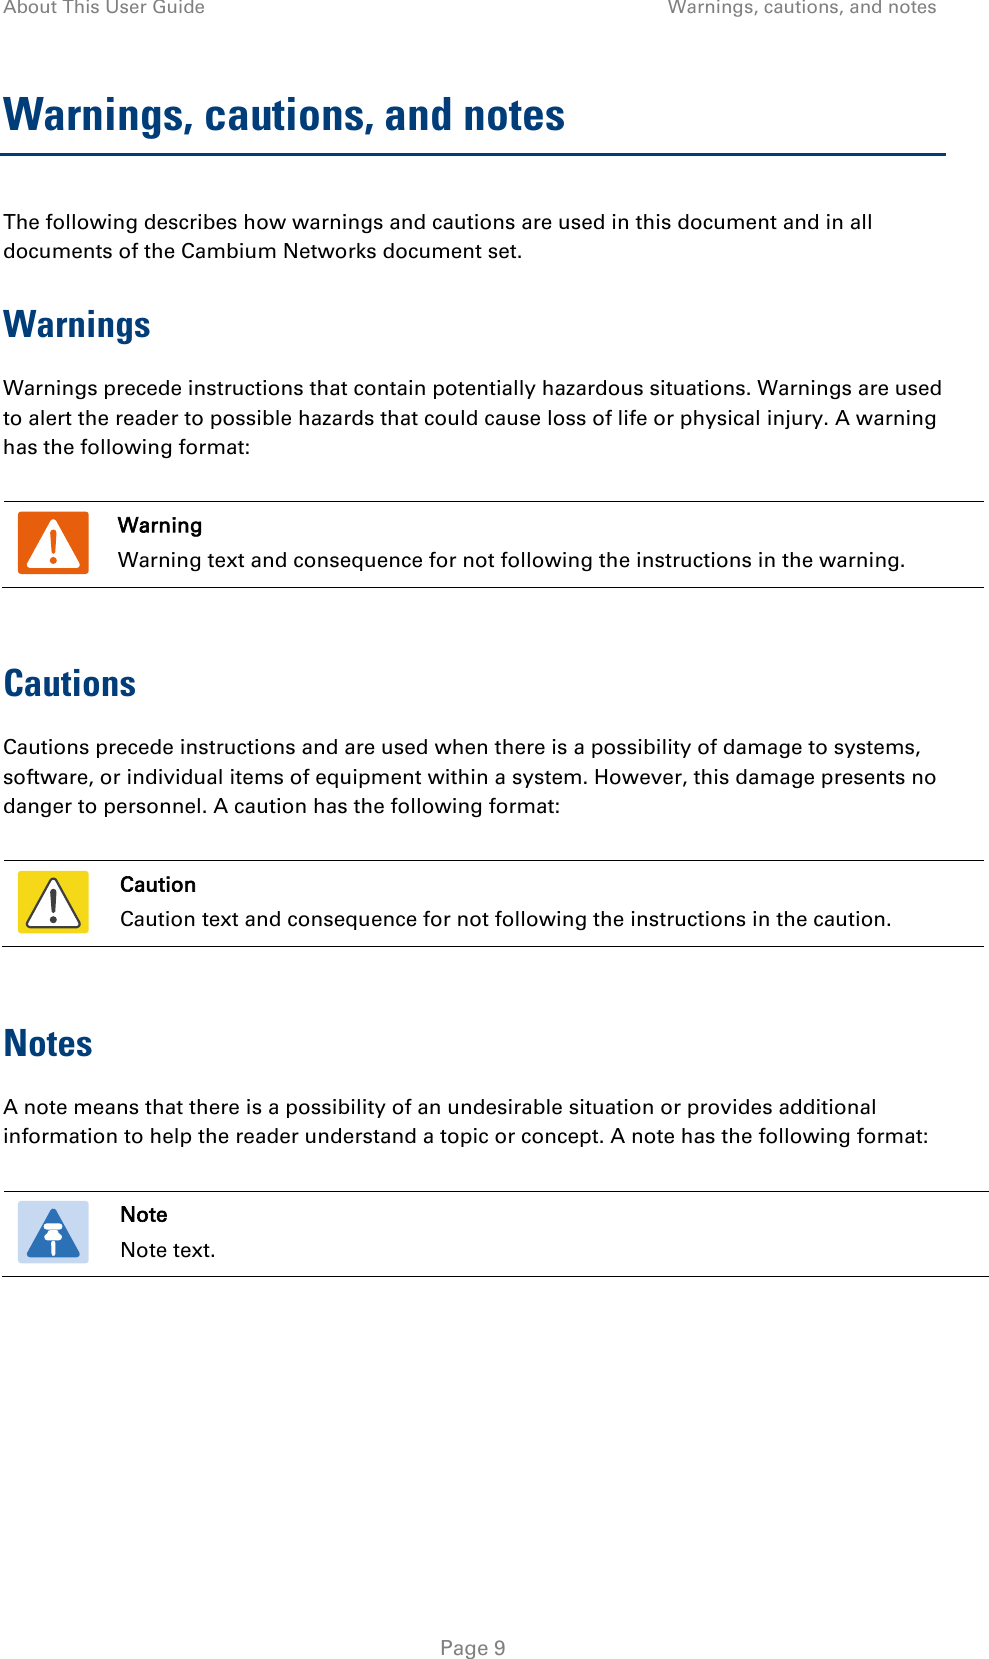 About This User Guide Warnings, cautions, and notes  Warnings, cautions, and notes The following describes how warnings and cautions are used in this document and in all documents of the Cambium Networks document set. Warnings Warnings precede instructions that contain potentially hazardous situations. Warnings are used to alert the reader to possible hazards that could cause loss of life or physical injury. A warning has the following format:   Warning Warning text and consequence for not following the instructions in the warning.  Cautions Cautions precede instructions and are used when there is a possibility of damage to systems, software, or individual items of equipment within a system. However, this damage presents no danger to personnel. A caution has the following format:   Caution Caution text and consequence for not following the instructions in the caution.  Notes A note means that there is a possibility of an undesirable situation or provides additional information to help the reader understand a topic or concept. A note has the following format:   Note Note text.   Page 9 